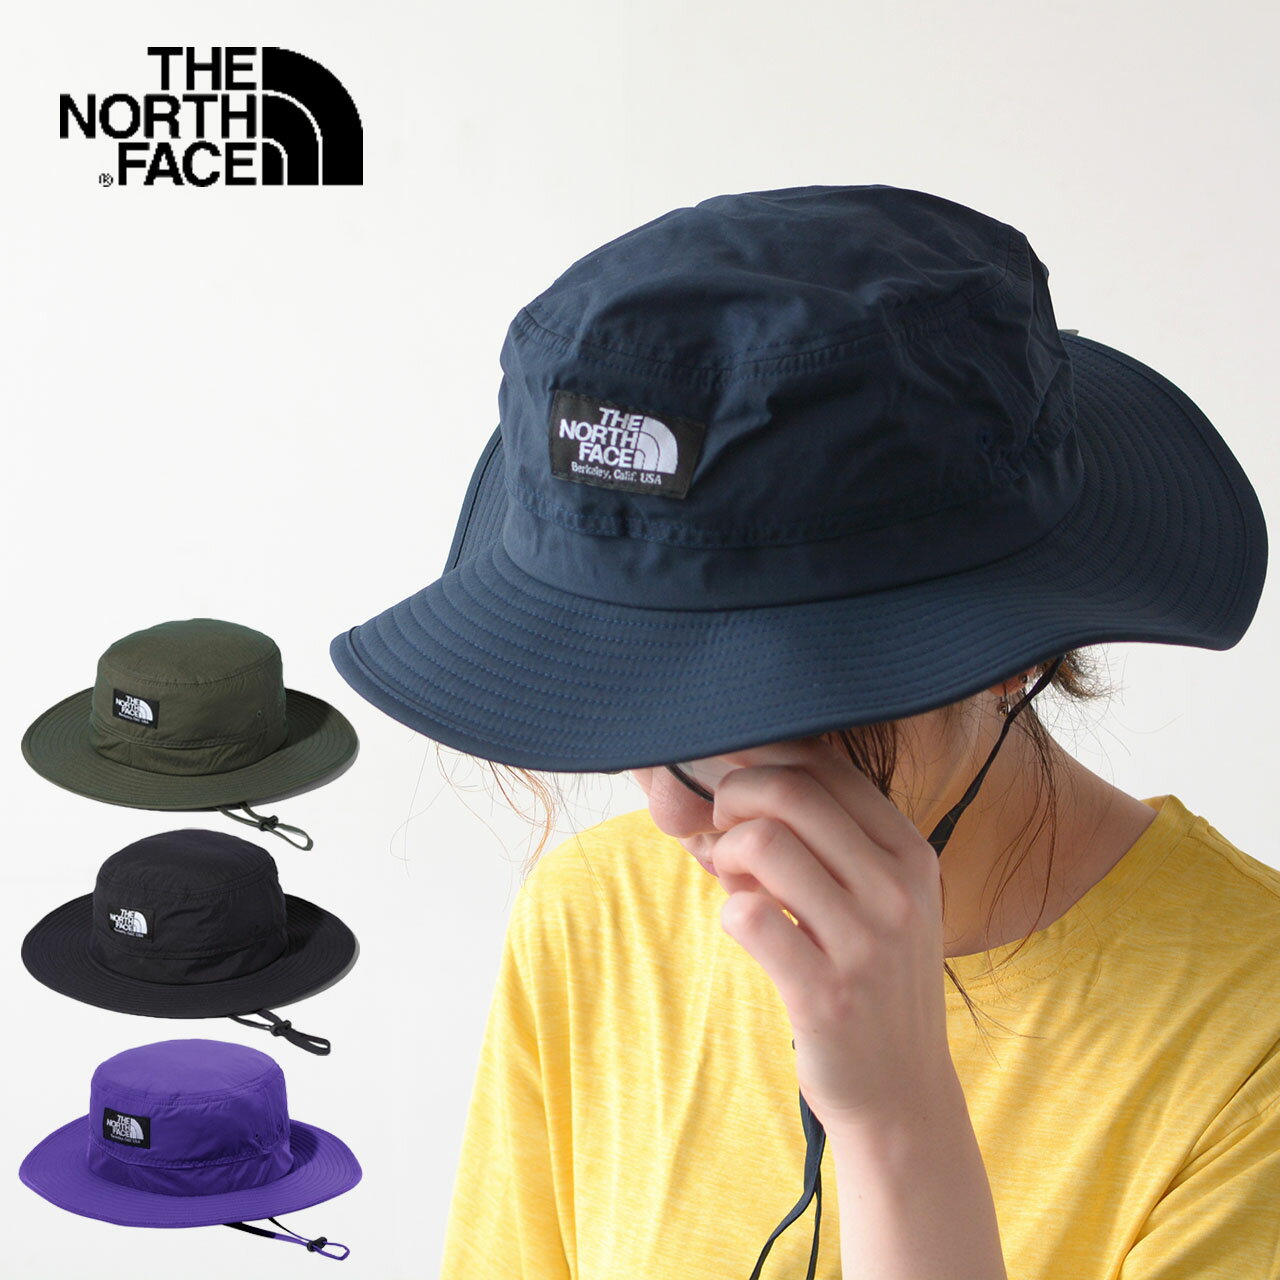 THE NORTH FACE  Horizon Hat  ホライズンハット ・ツバ広ハット・ガーデニング・ブーニーハット・フェス・日よけ帽子・旅行 MEN'S/LADY'S/UNISEX 